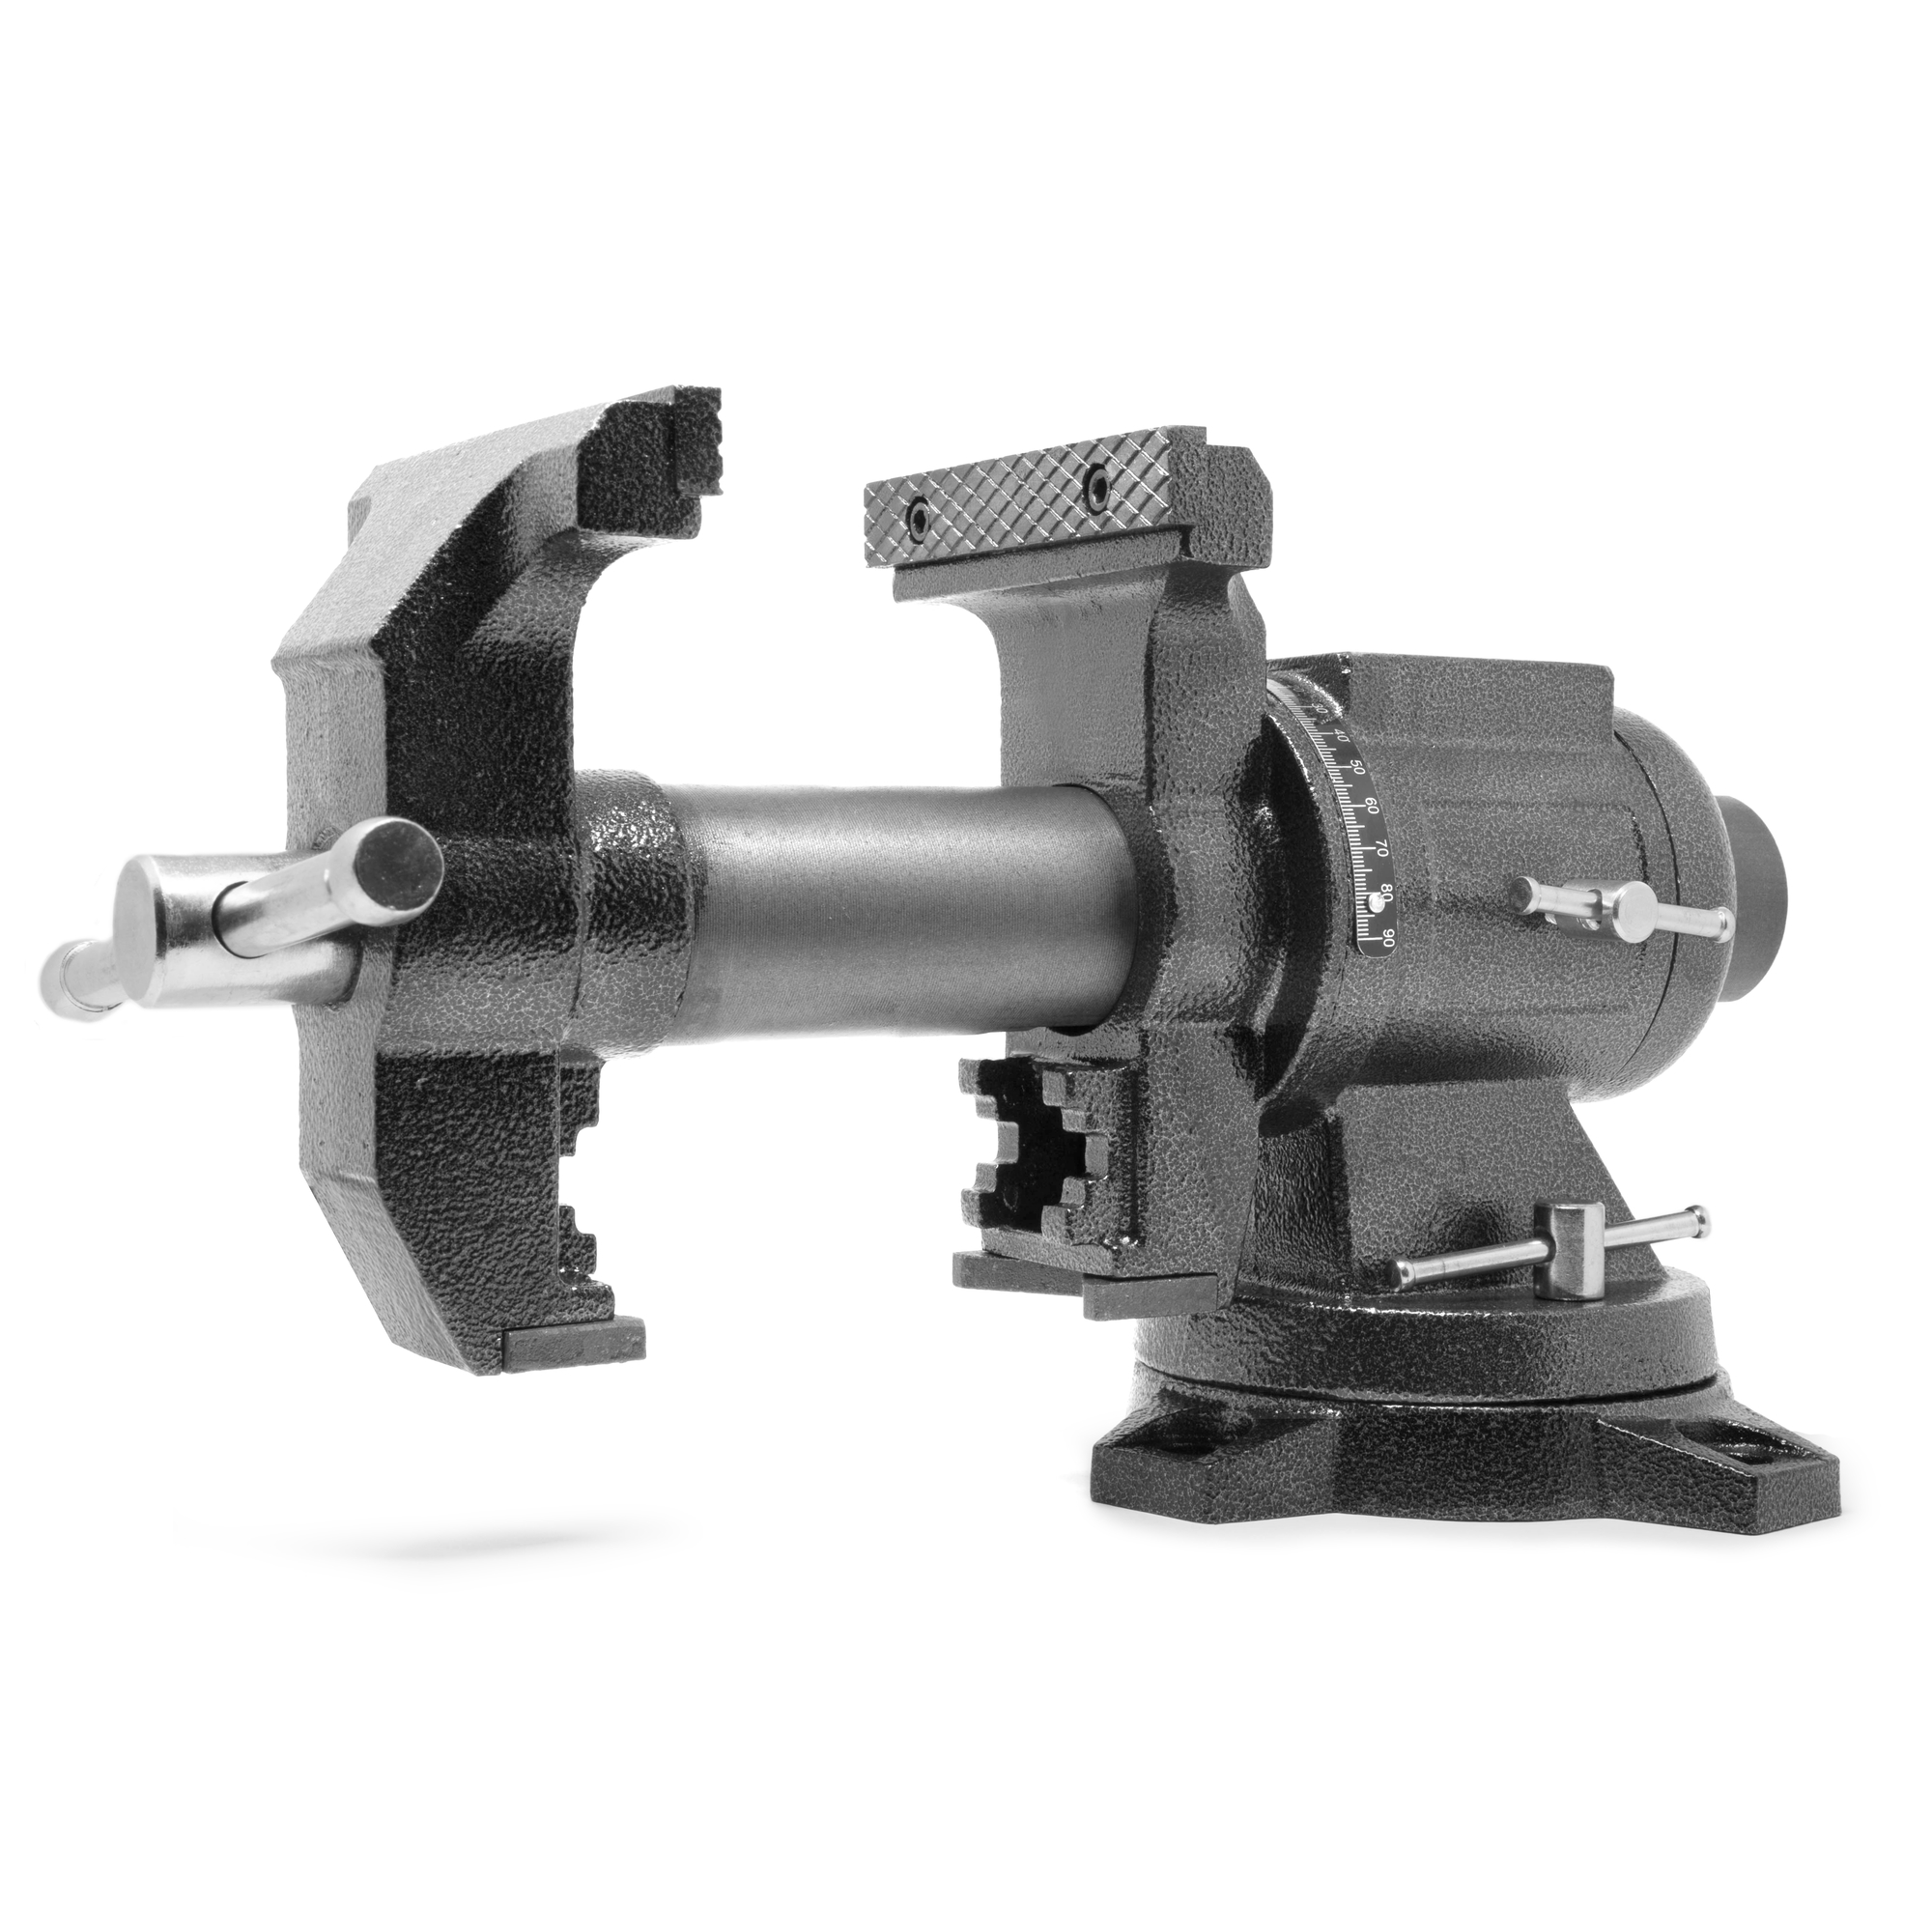 WEN, 5Inch Cast Iron Bench Vise with Swivel Base, Jaw Width 5 in, Jaw Capacity 5 in, Material Cast Iron, Model MPV502